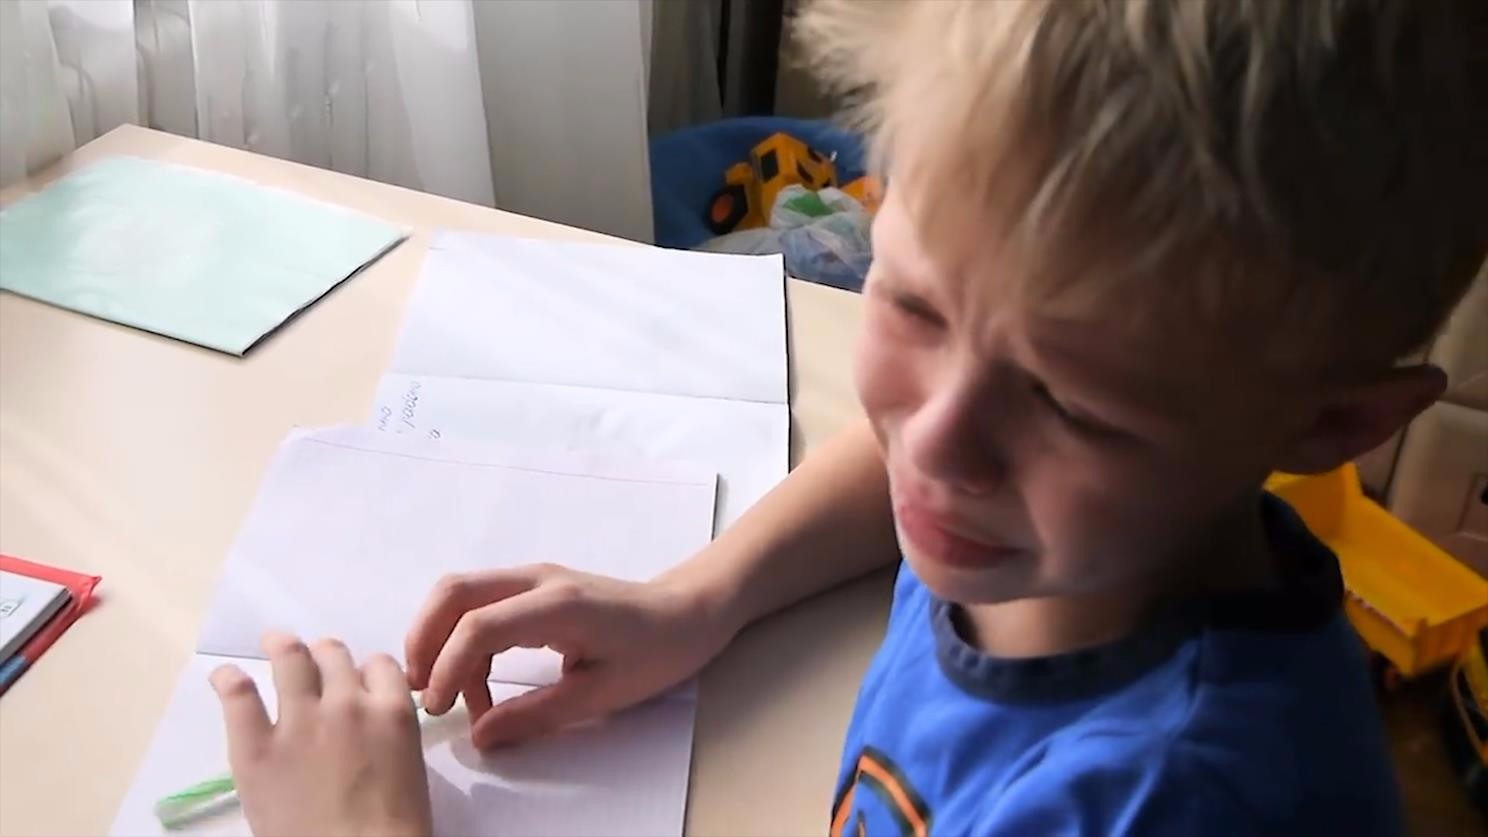 Russia's 9-year-old student cried over a math problem that I couldn't do.